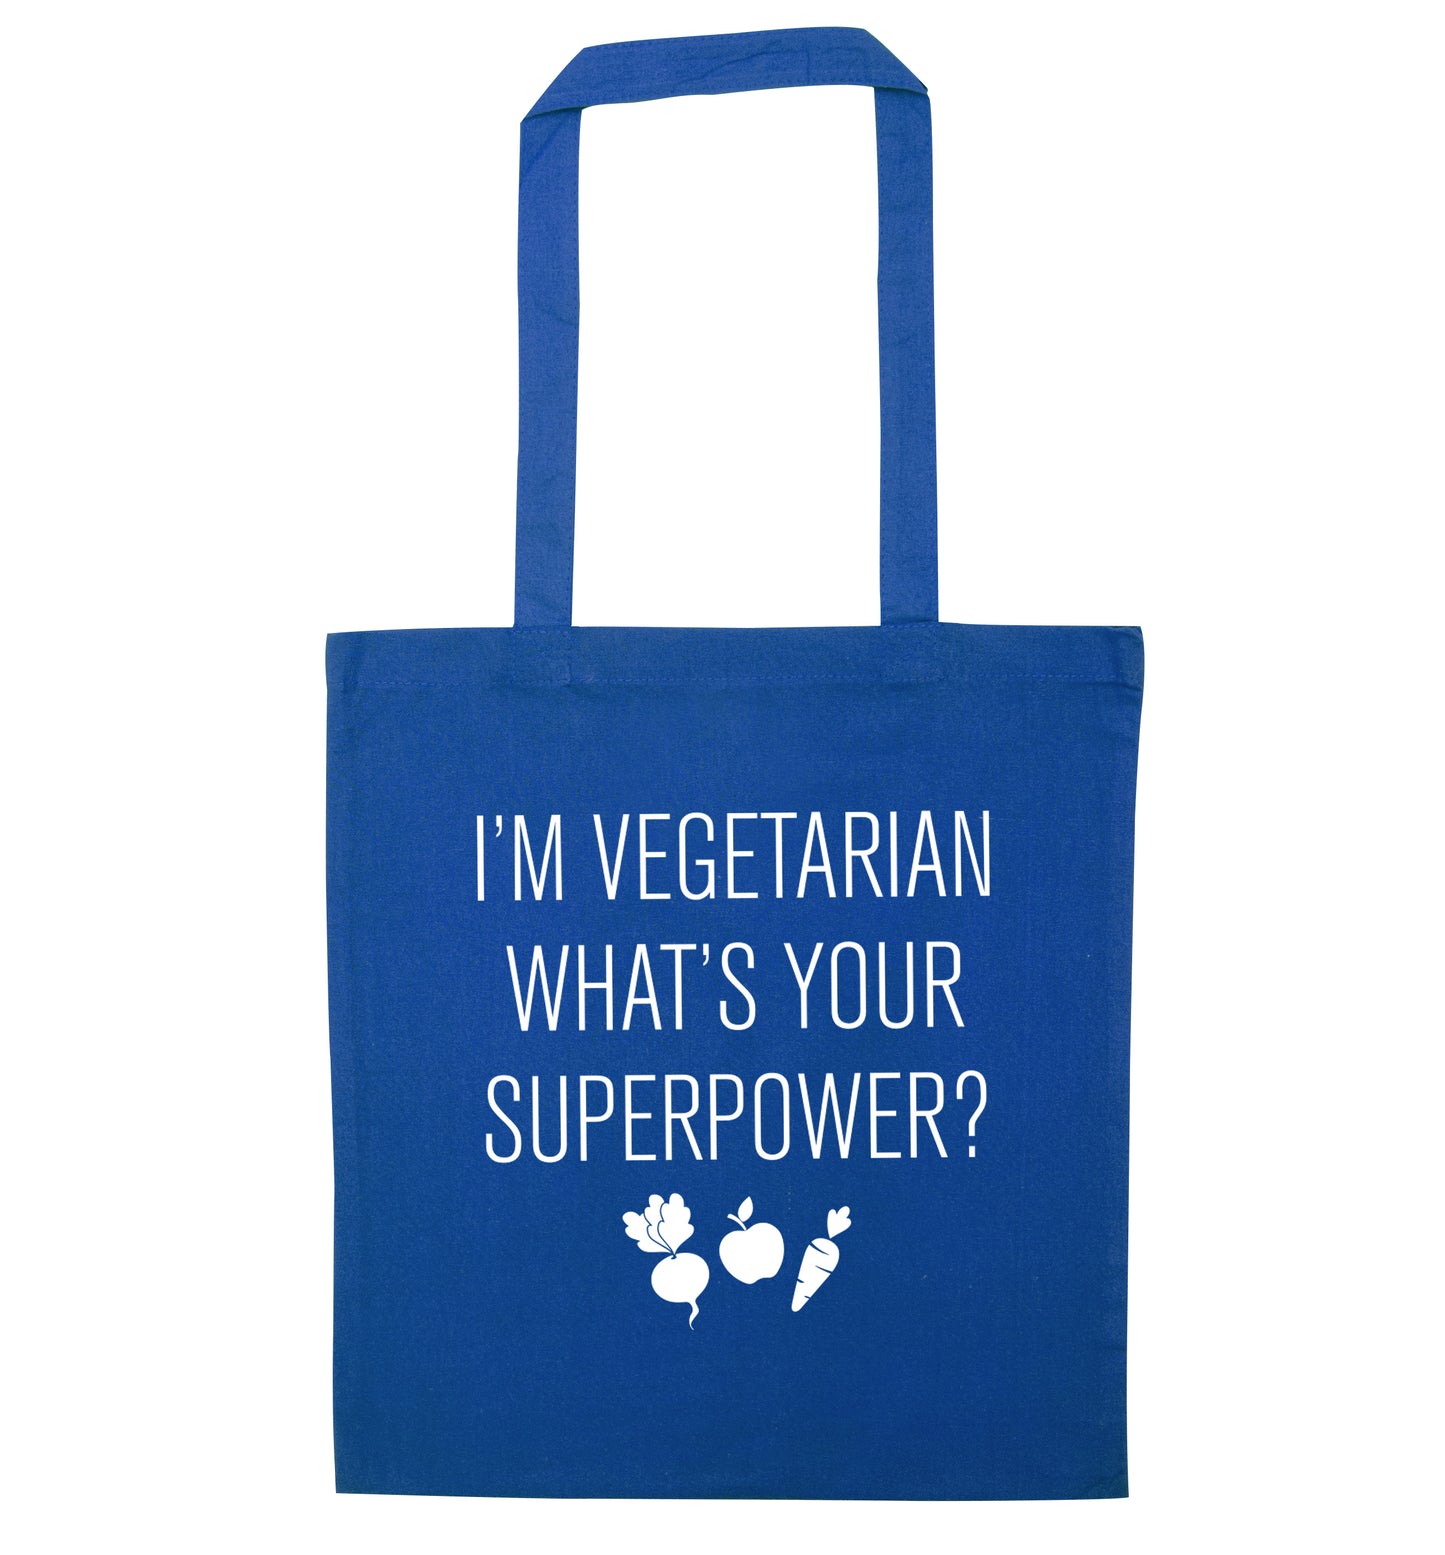 I'm vegetarian what's your superpower? blue tote bag